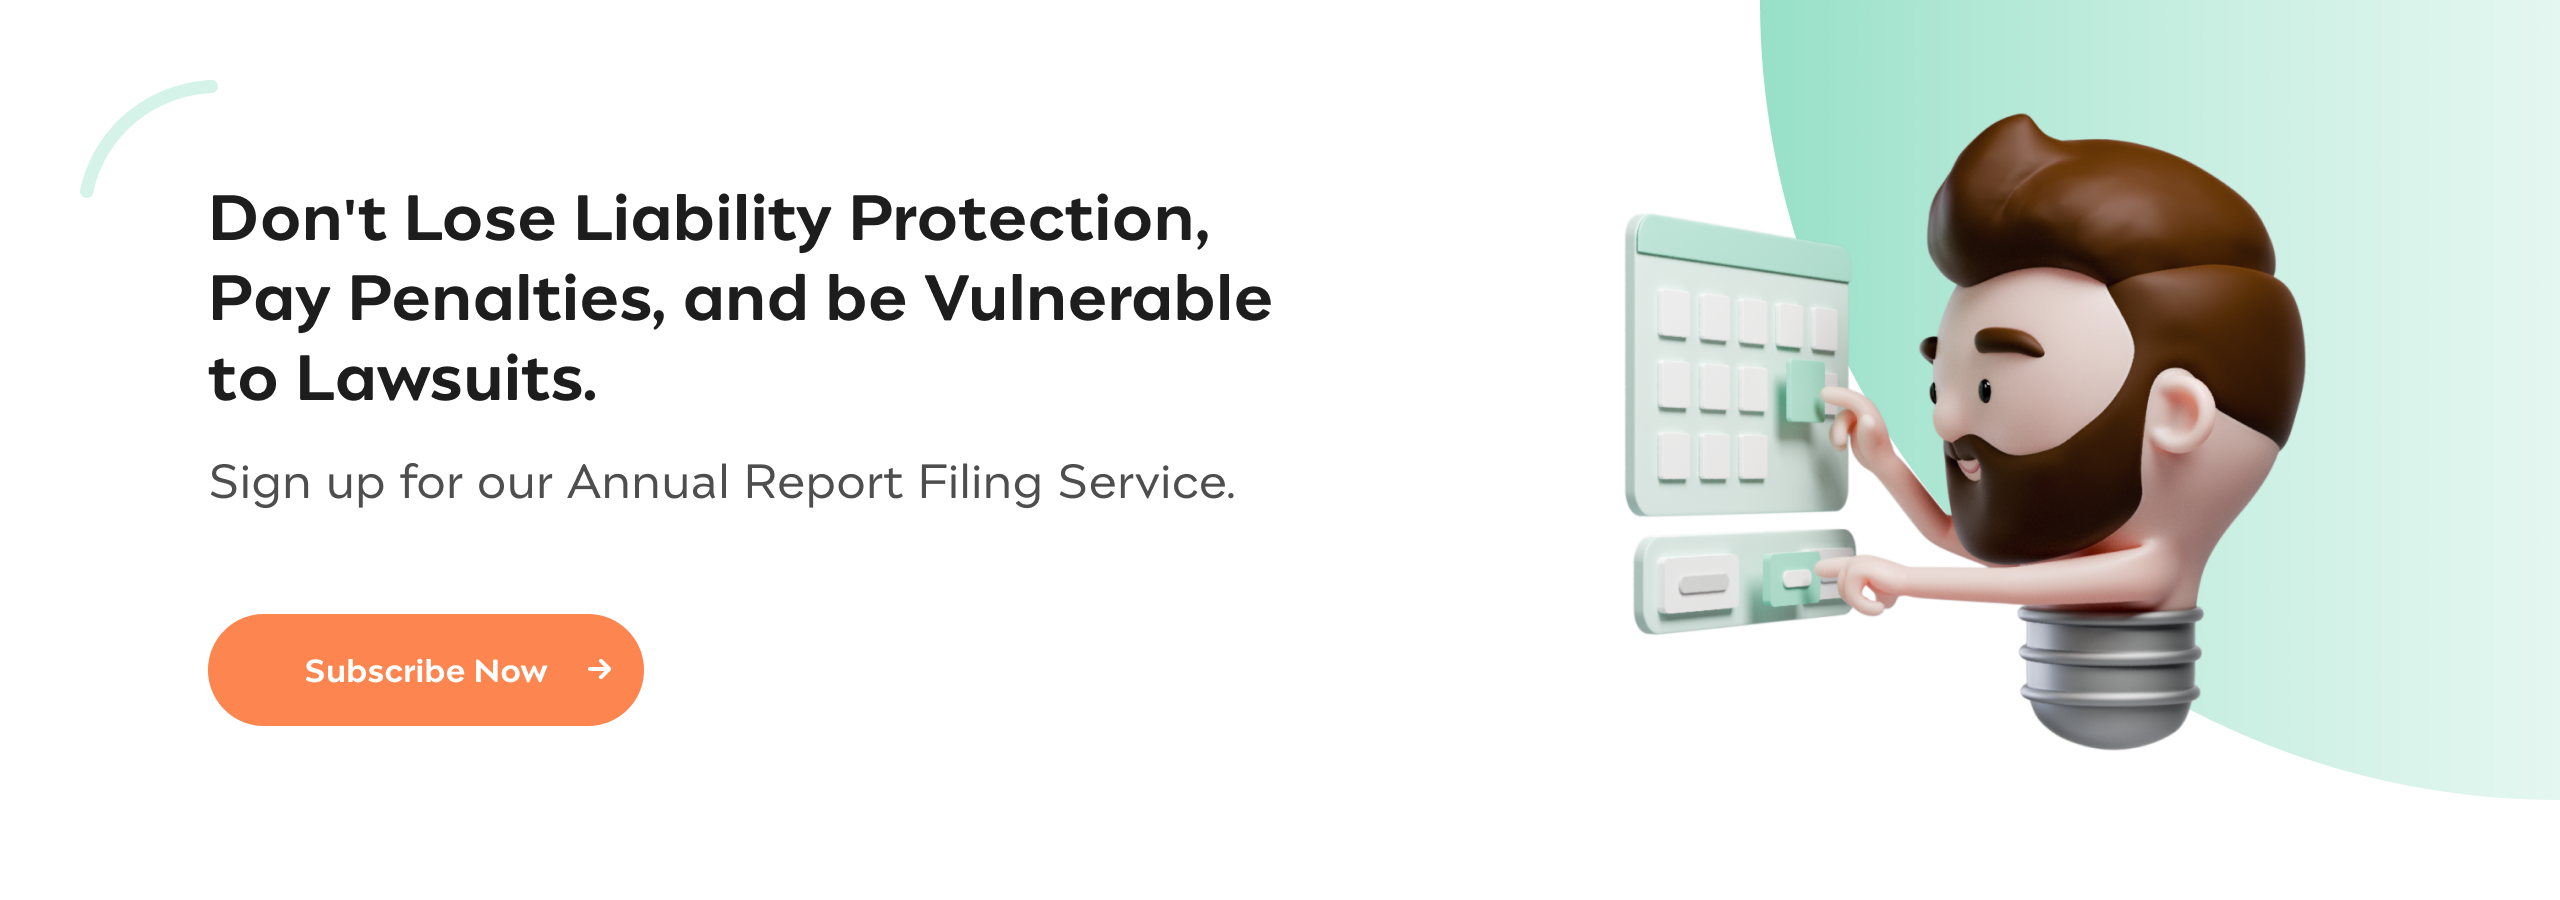 Don't Lose Liability Protection, Pay Penalties, and be Vulnerable to Lawsuits. Sign up for our Annual Report Filing Service.